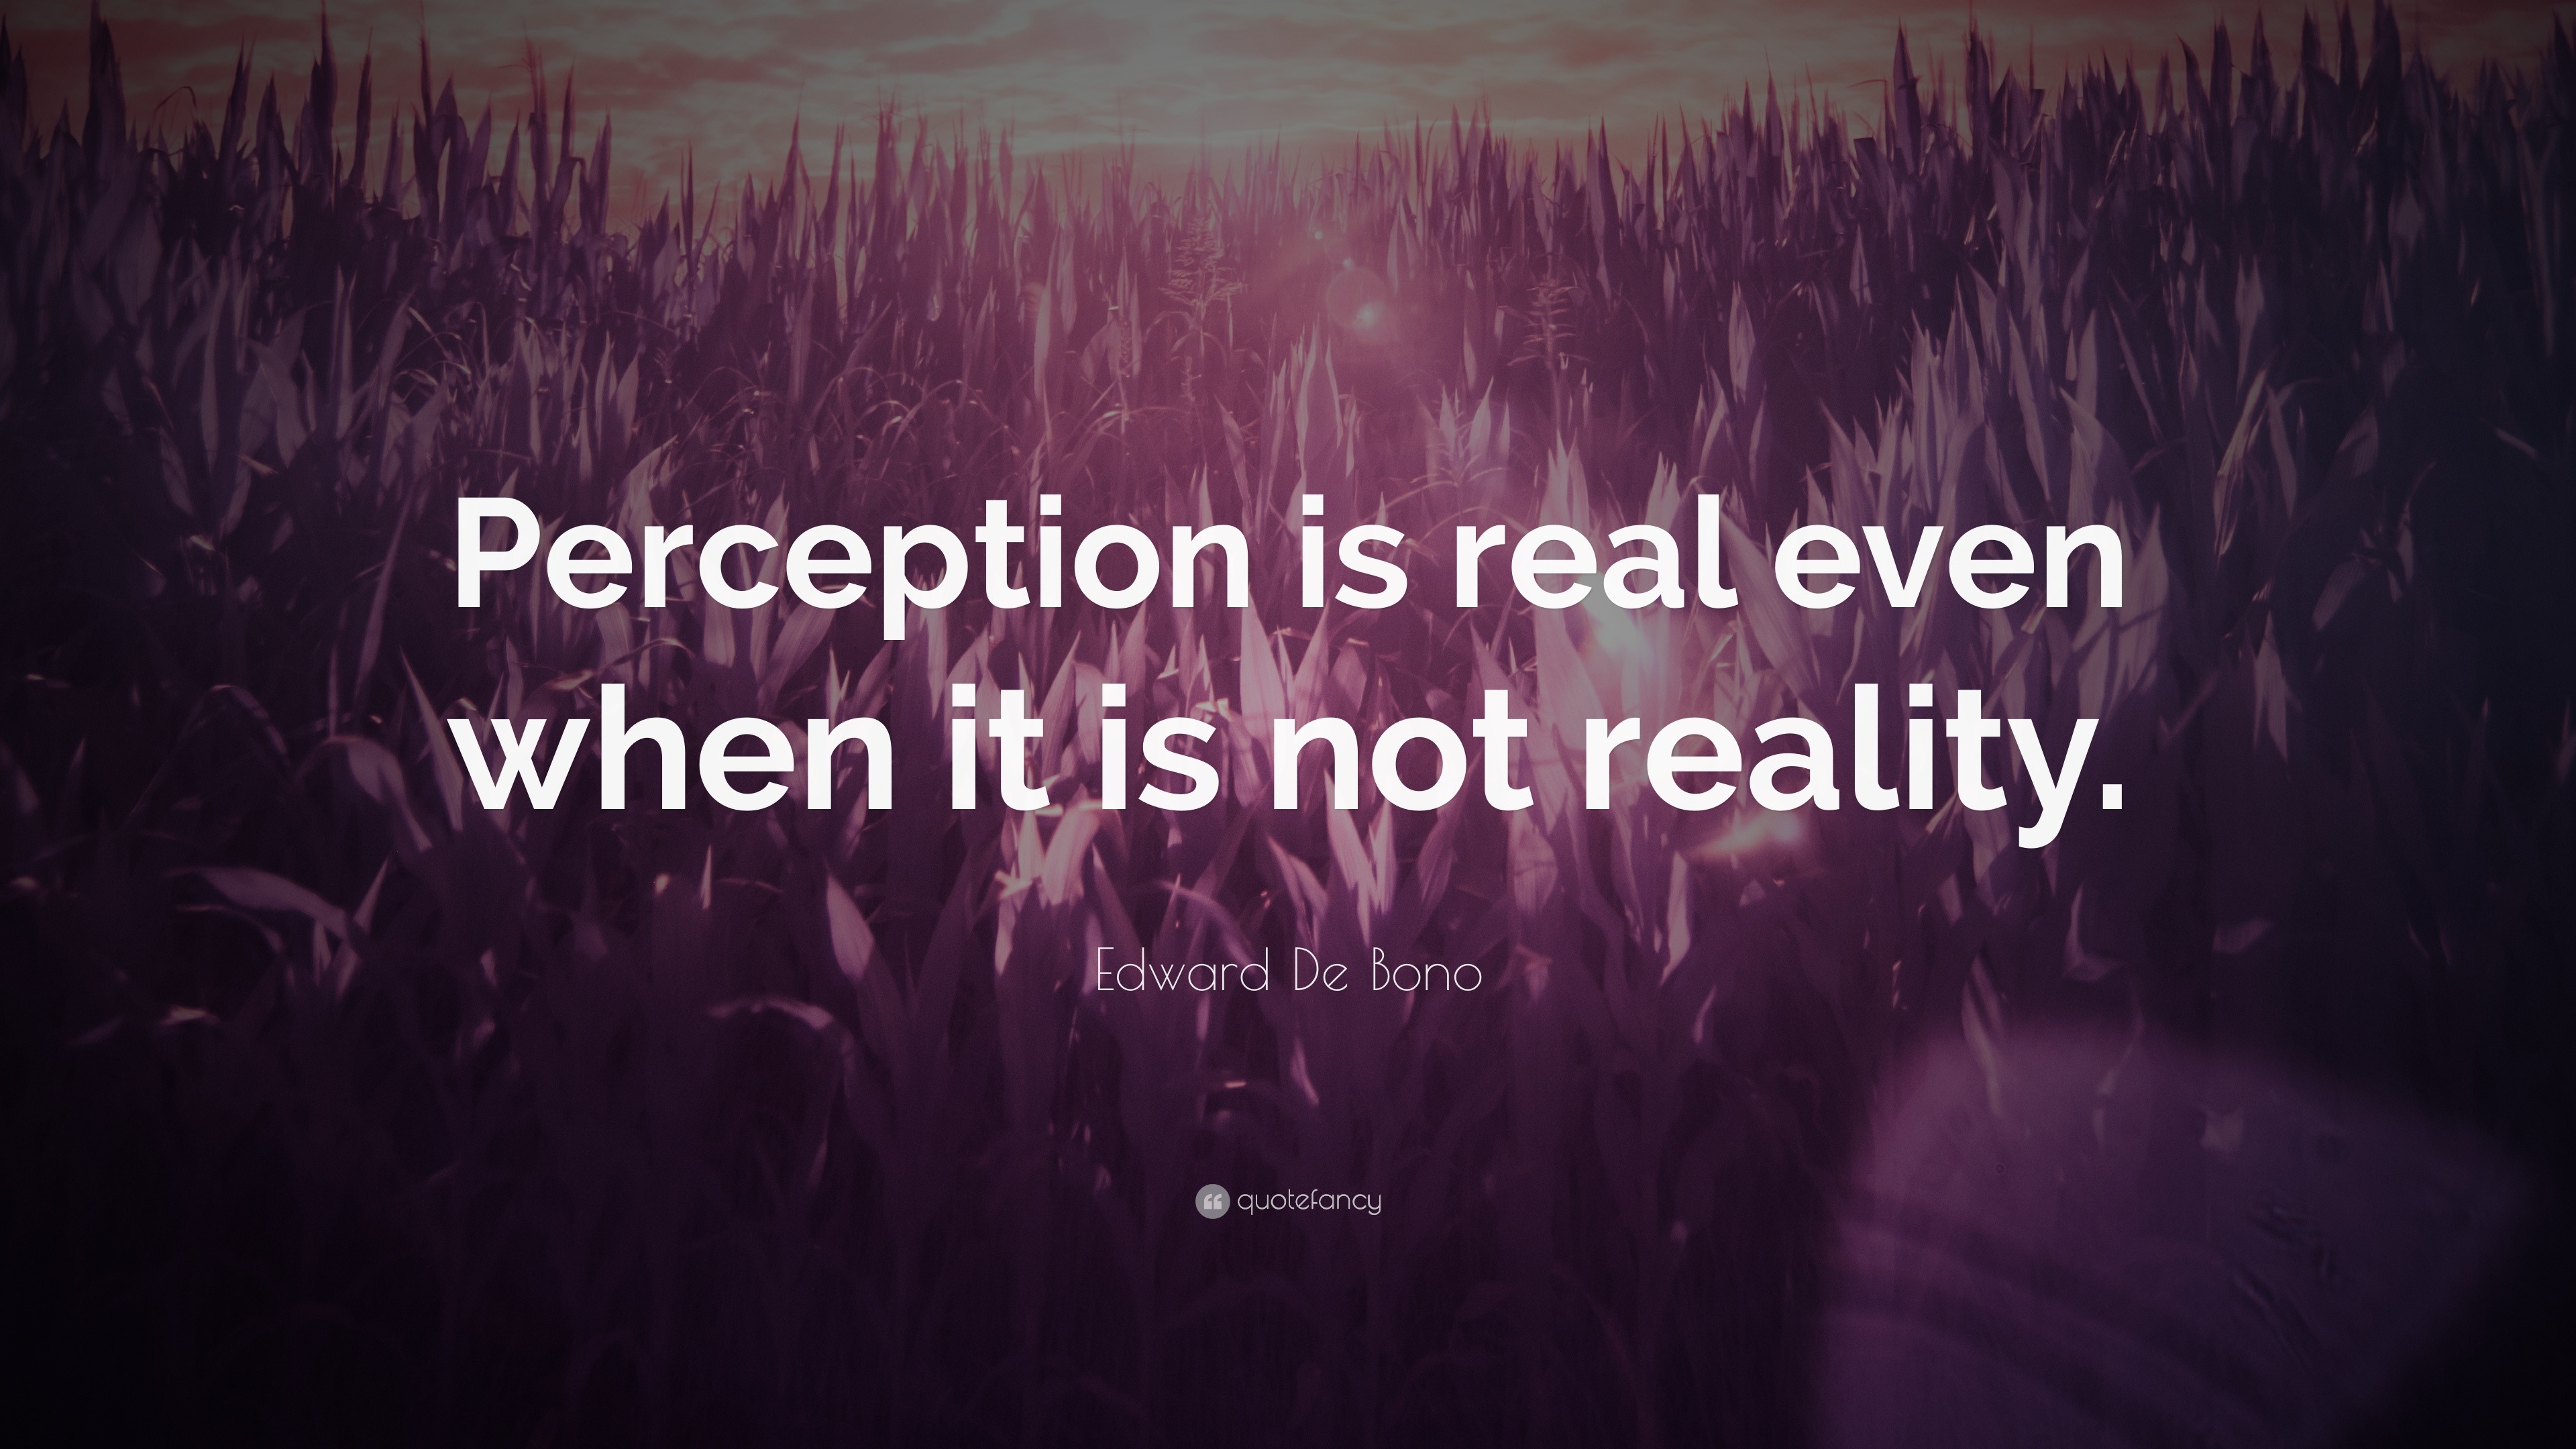 Edward De Bono Quote: “Perception is real even when it is not reality ...